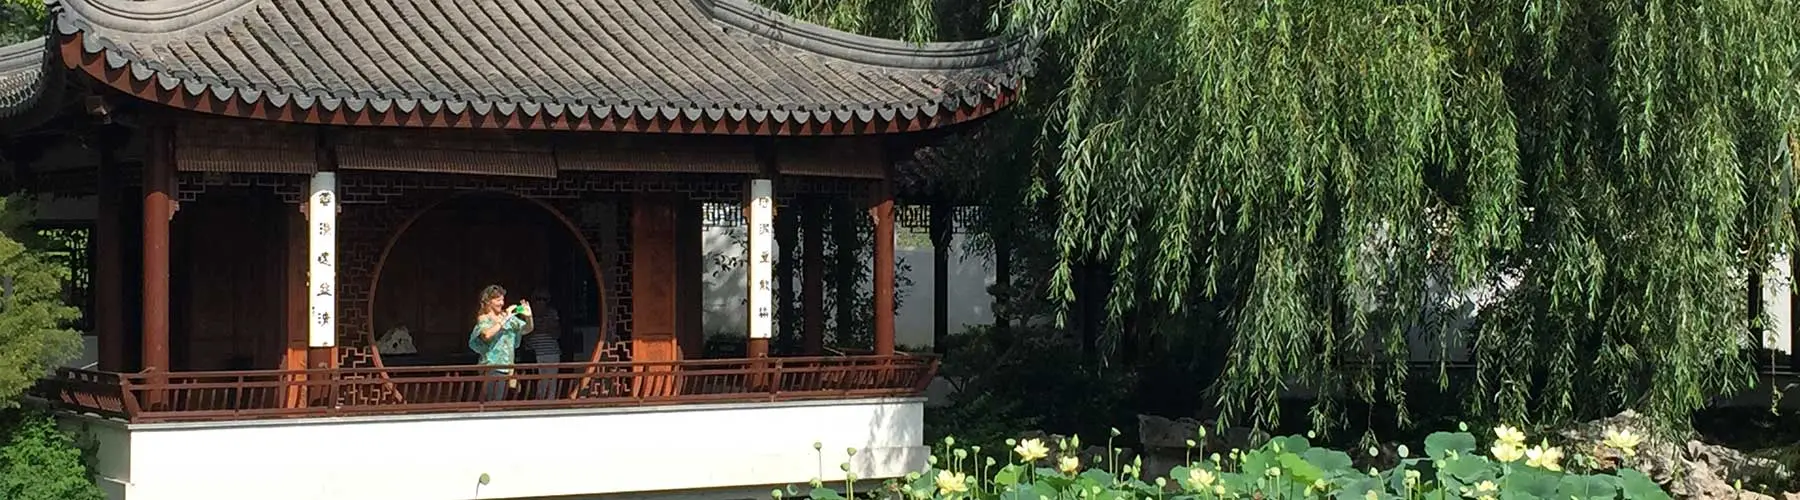 Lady taking picture in the Chinese Garden